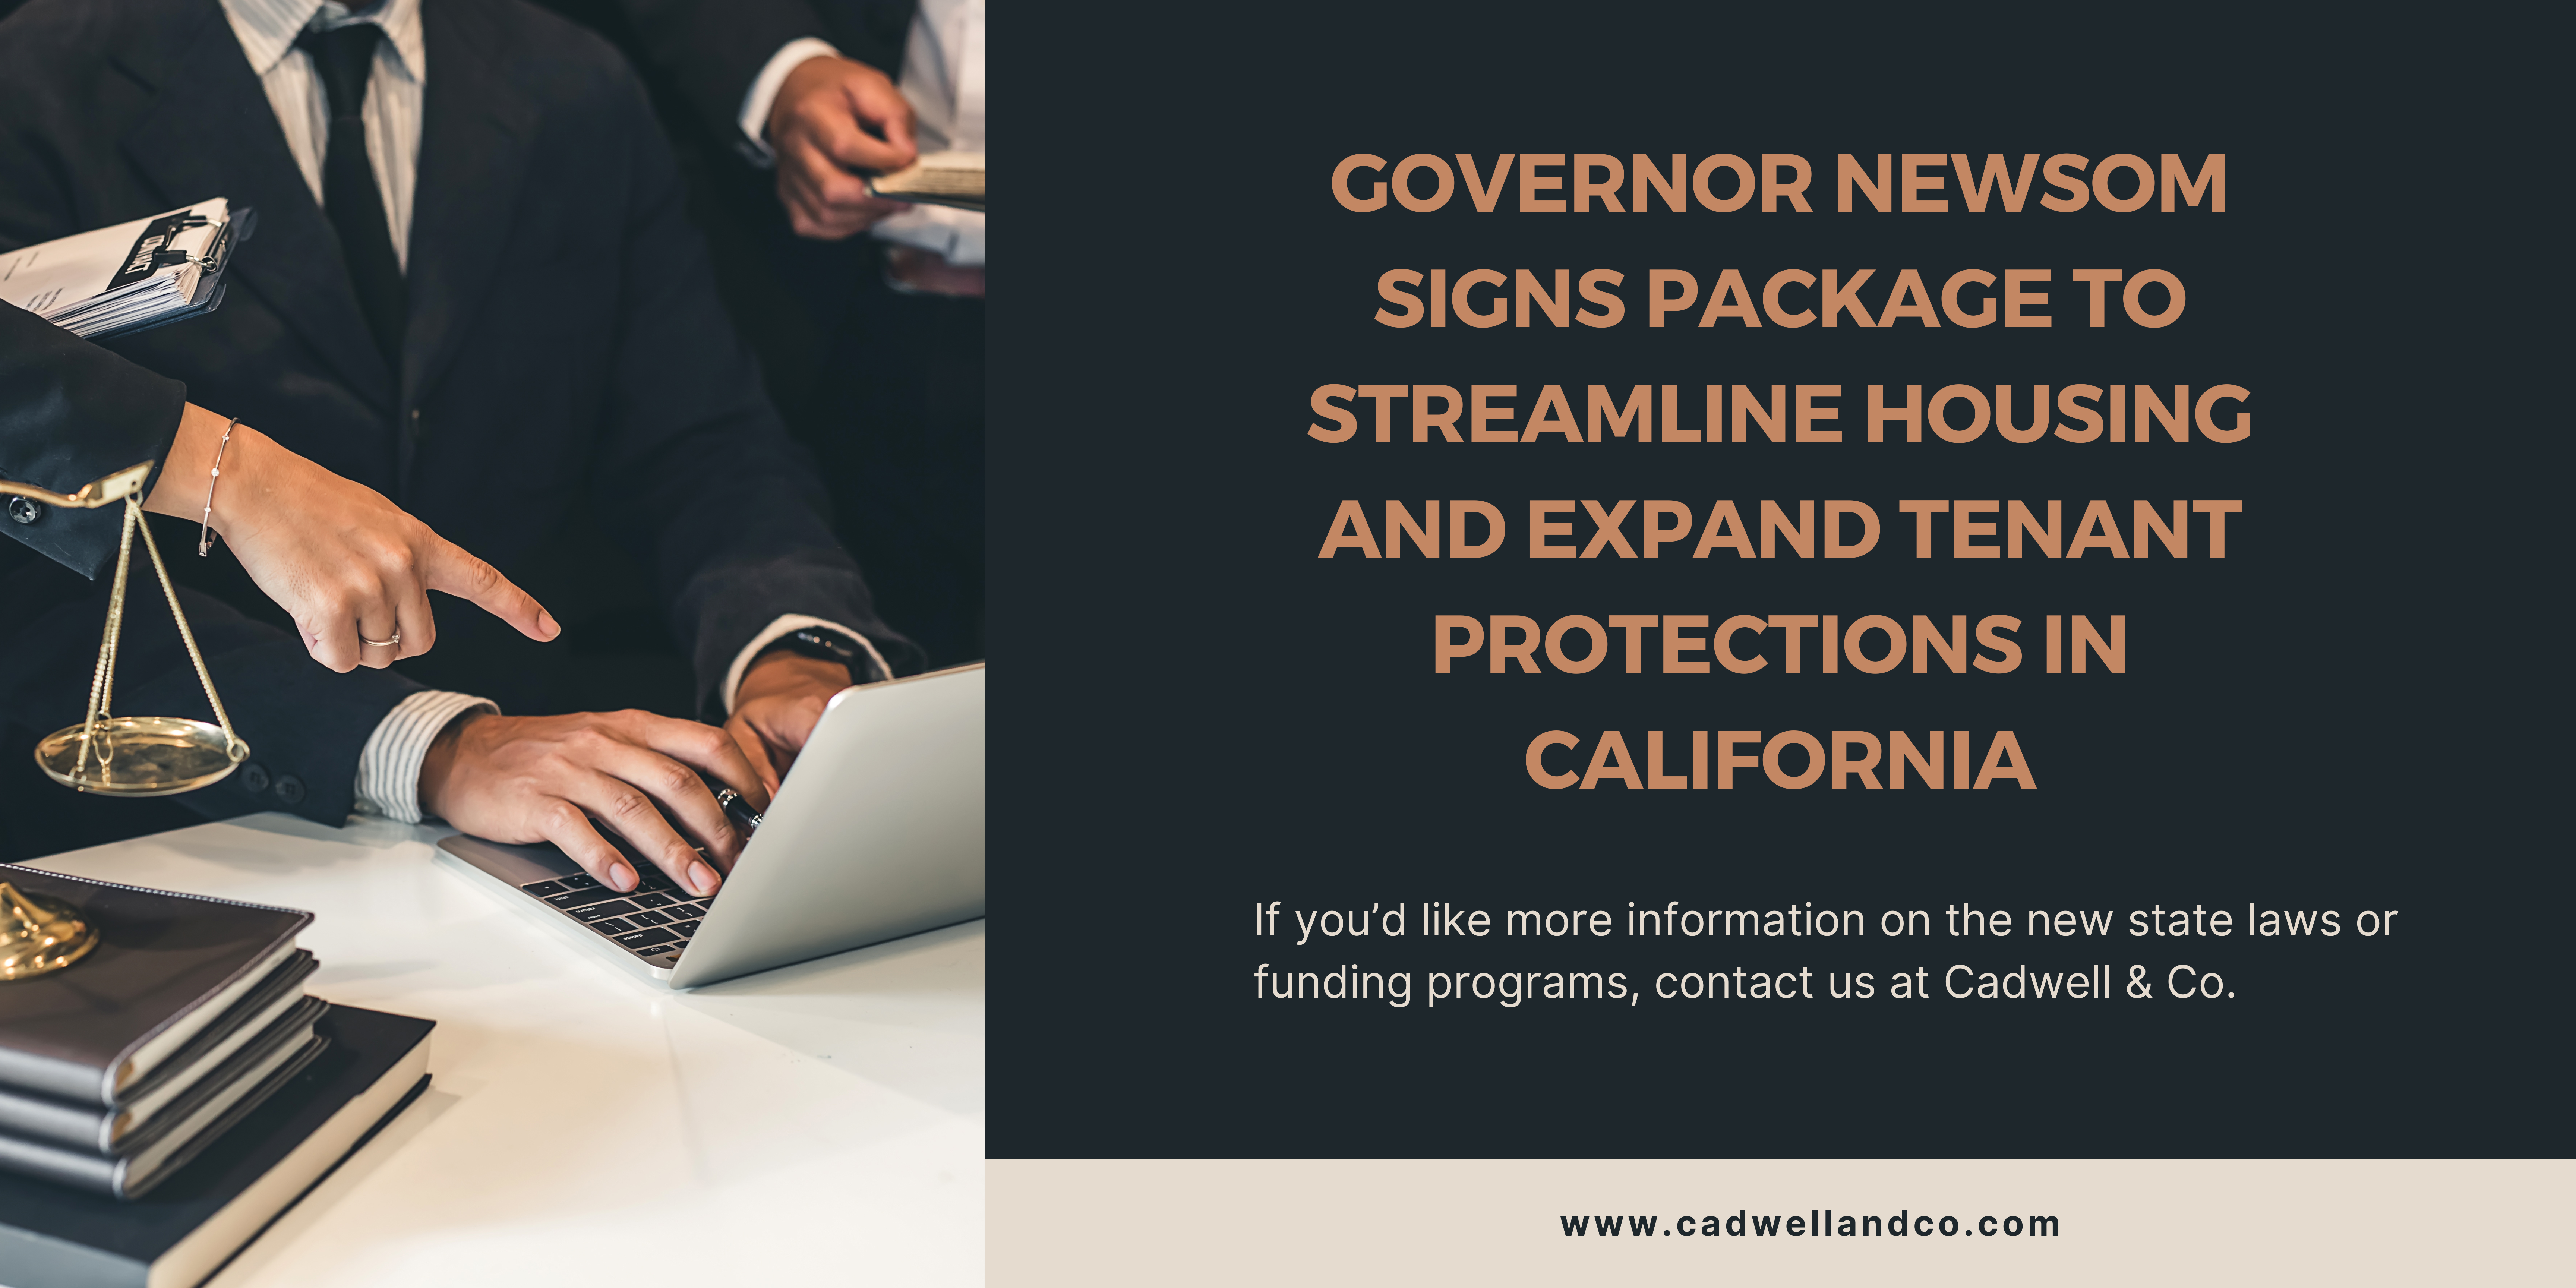 Governor Newsom Signs Package to Streamline Housing and Expand Tenant Protections in California